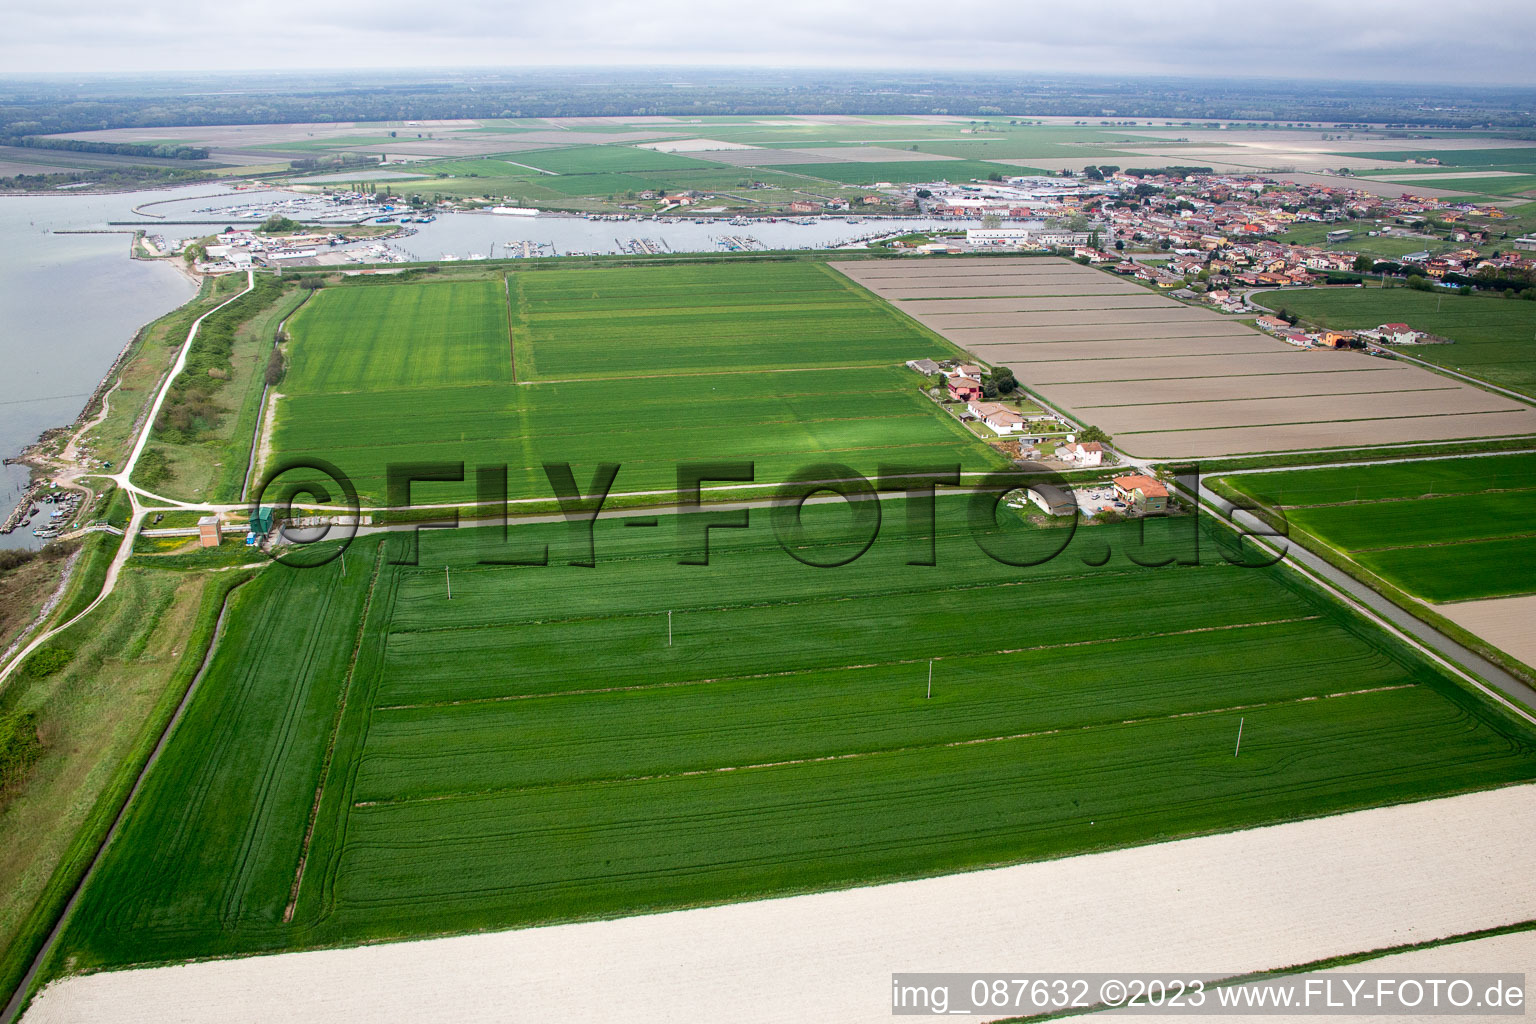 Aerial photograpy of Caserma Finanza in the state Emilia Romagna, Italy